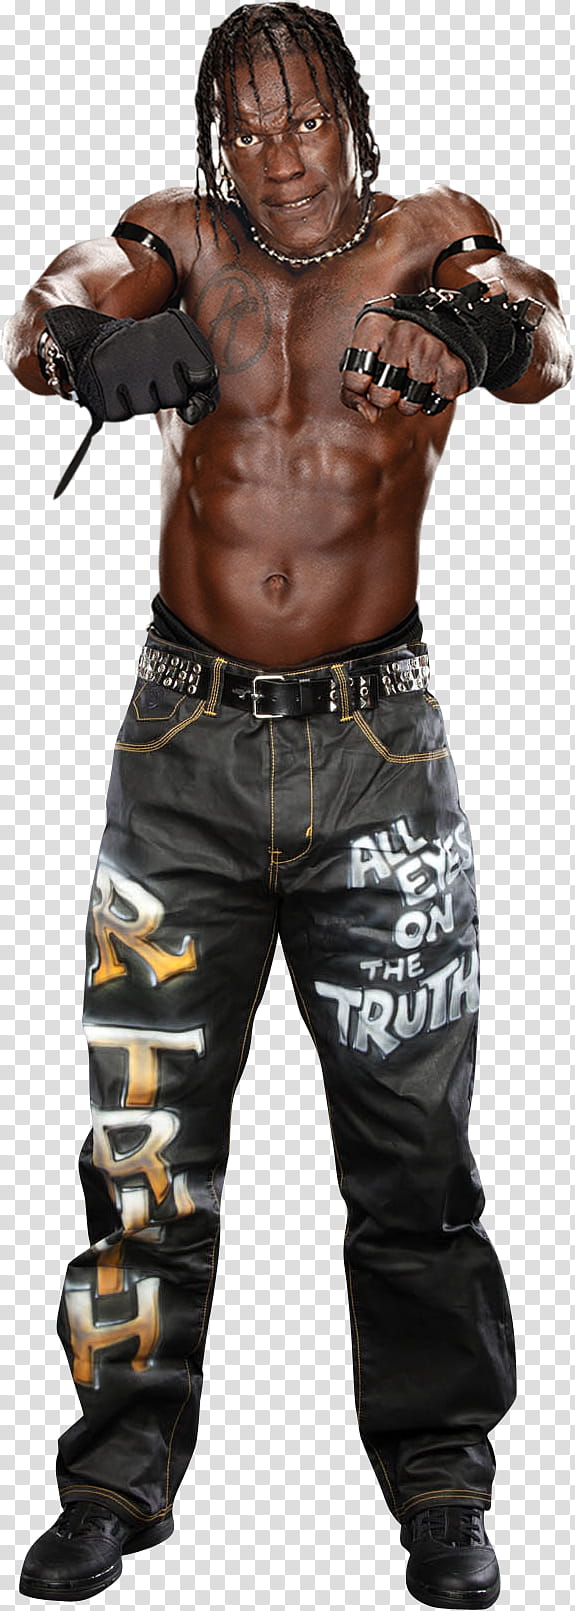 R Truth transparent background PNG clipart